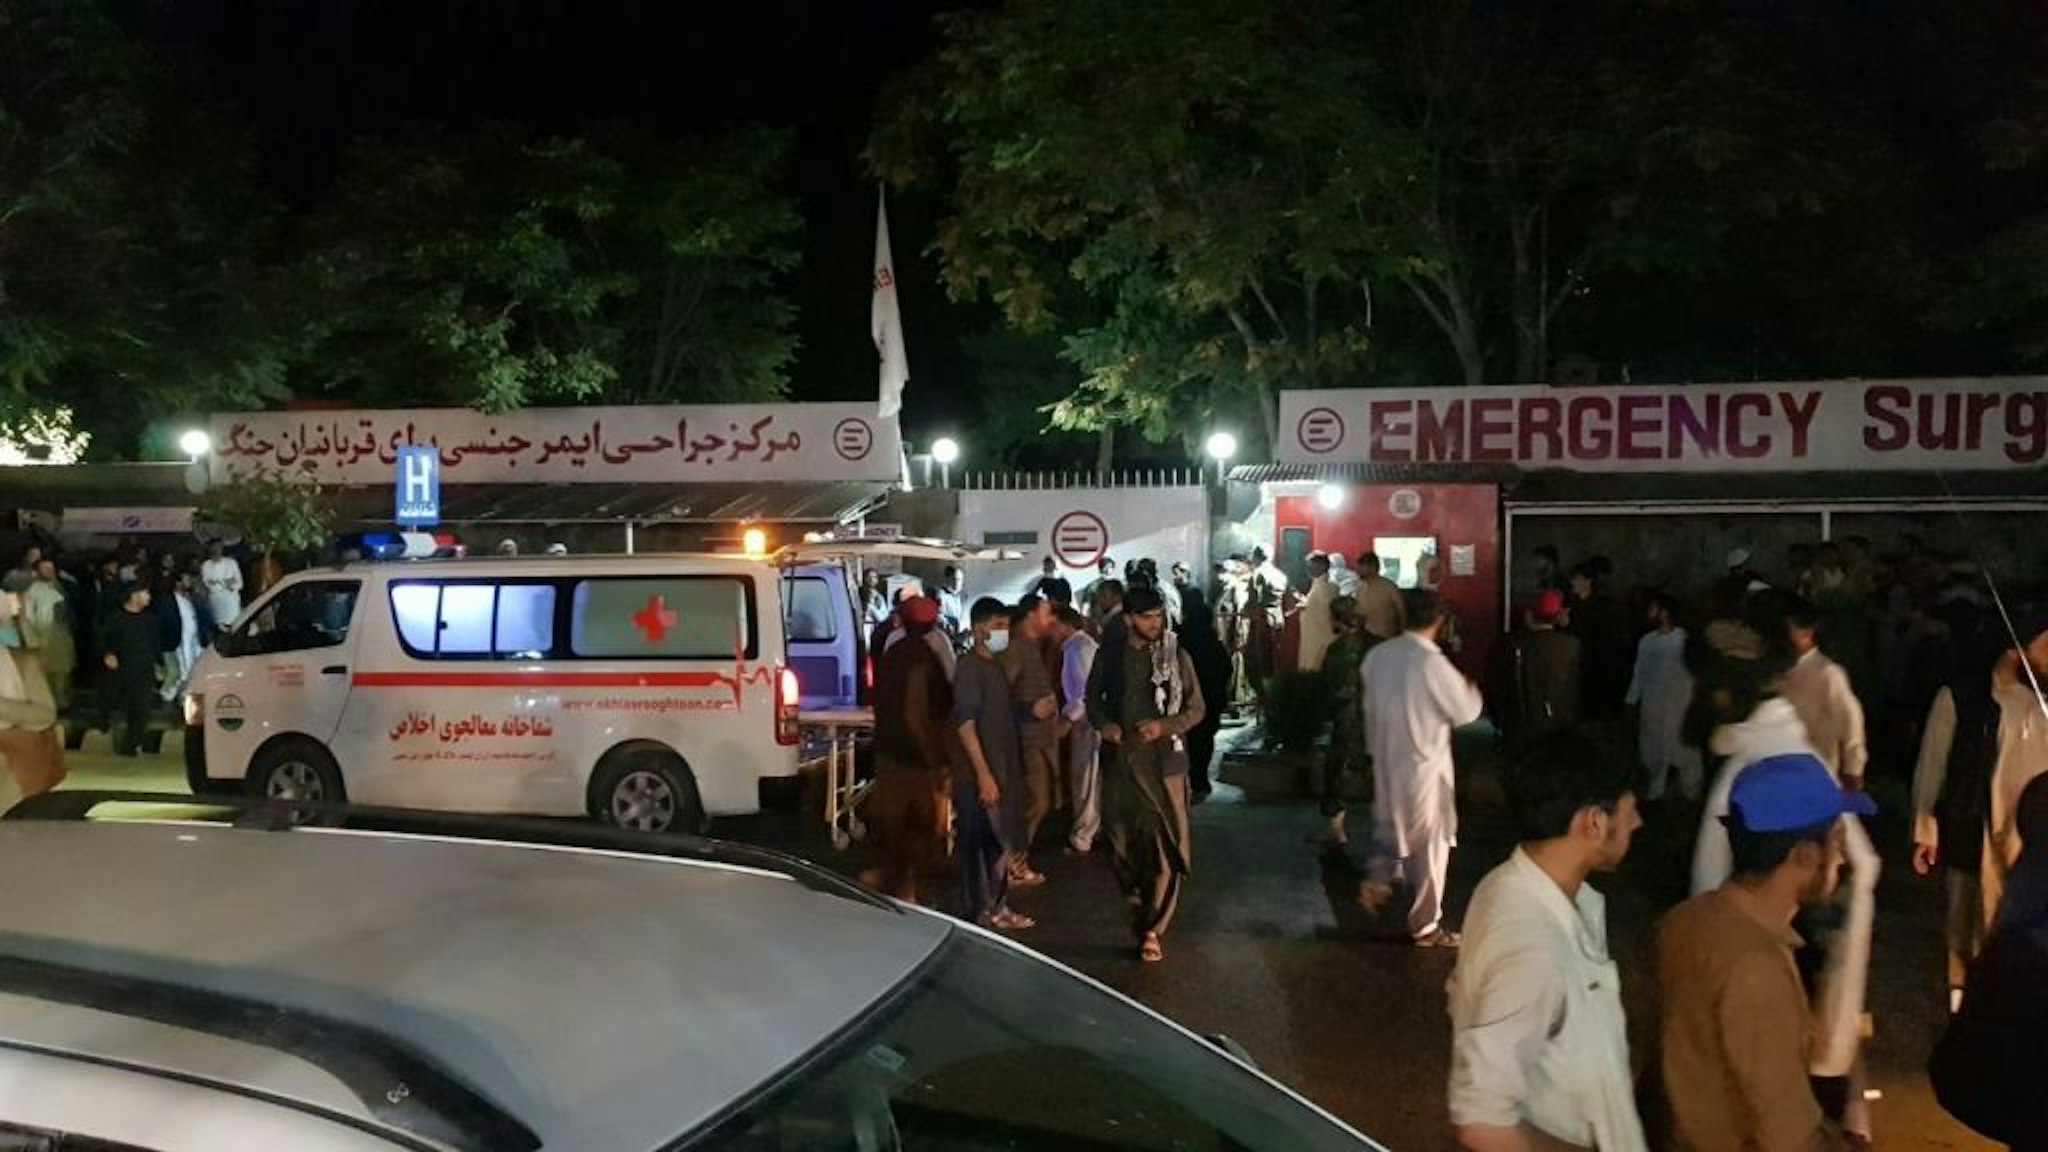 Injured people being carried to a hospital as unspecified number of casualties reported after two explosions outside Hamid Karzai International Airport in Kabul, Afghanistan on August 26, 2021.